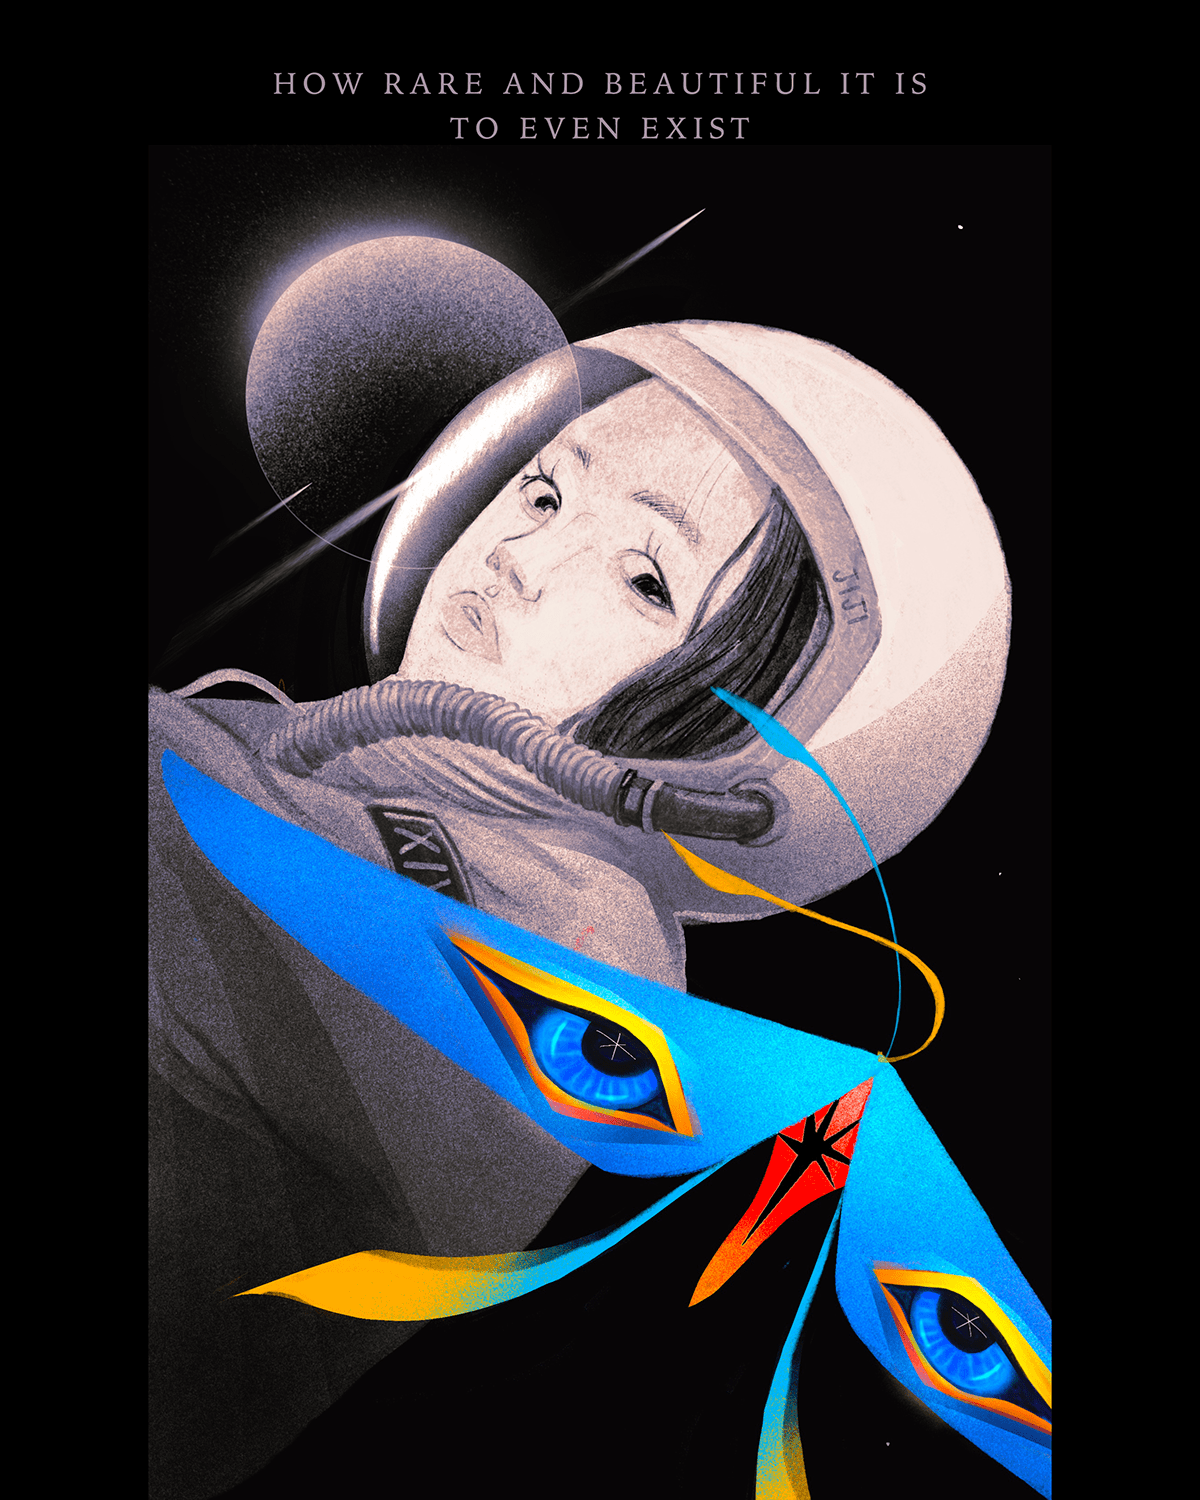 astronauts cosmo deep space galaxy ILLUSTRATION  Planets saturn sci-fi Space  to even exist.